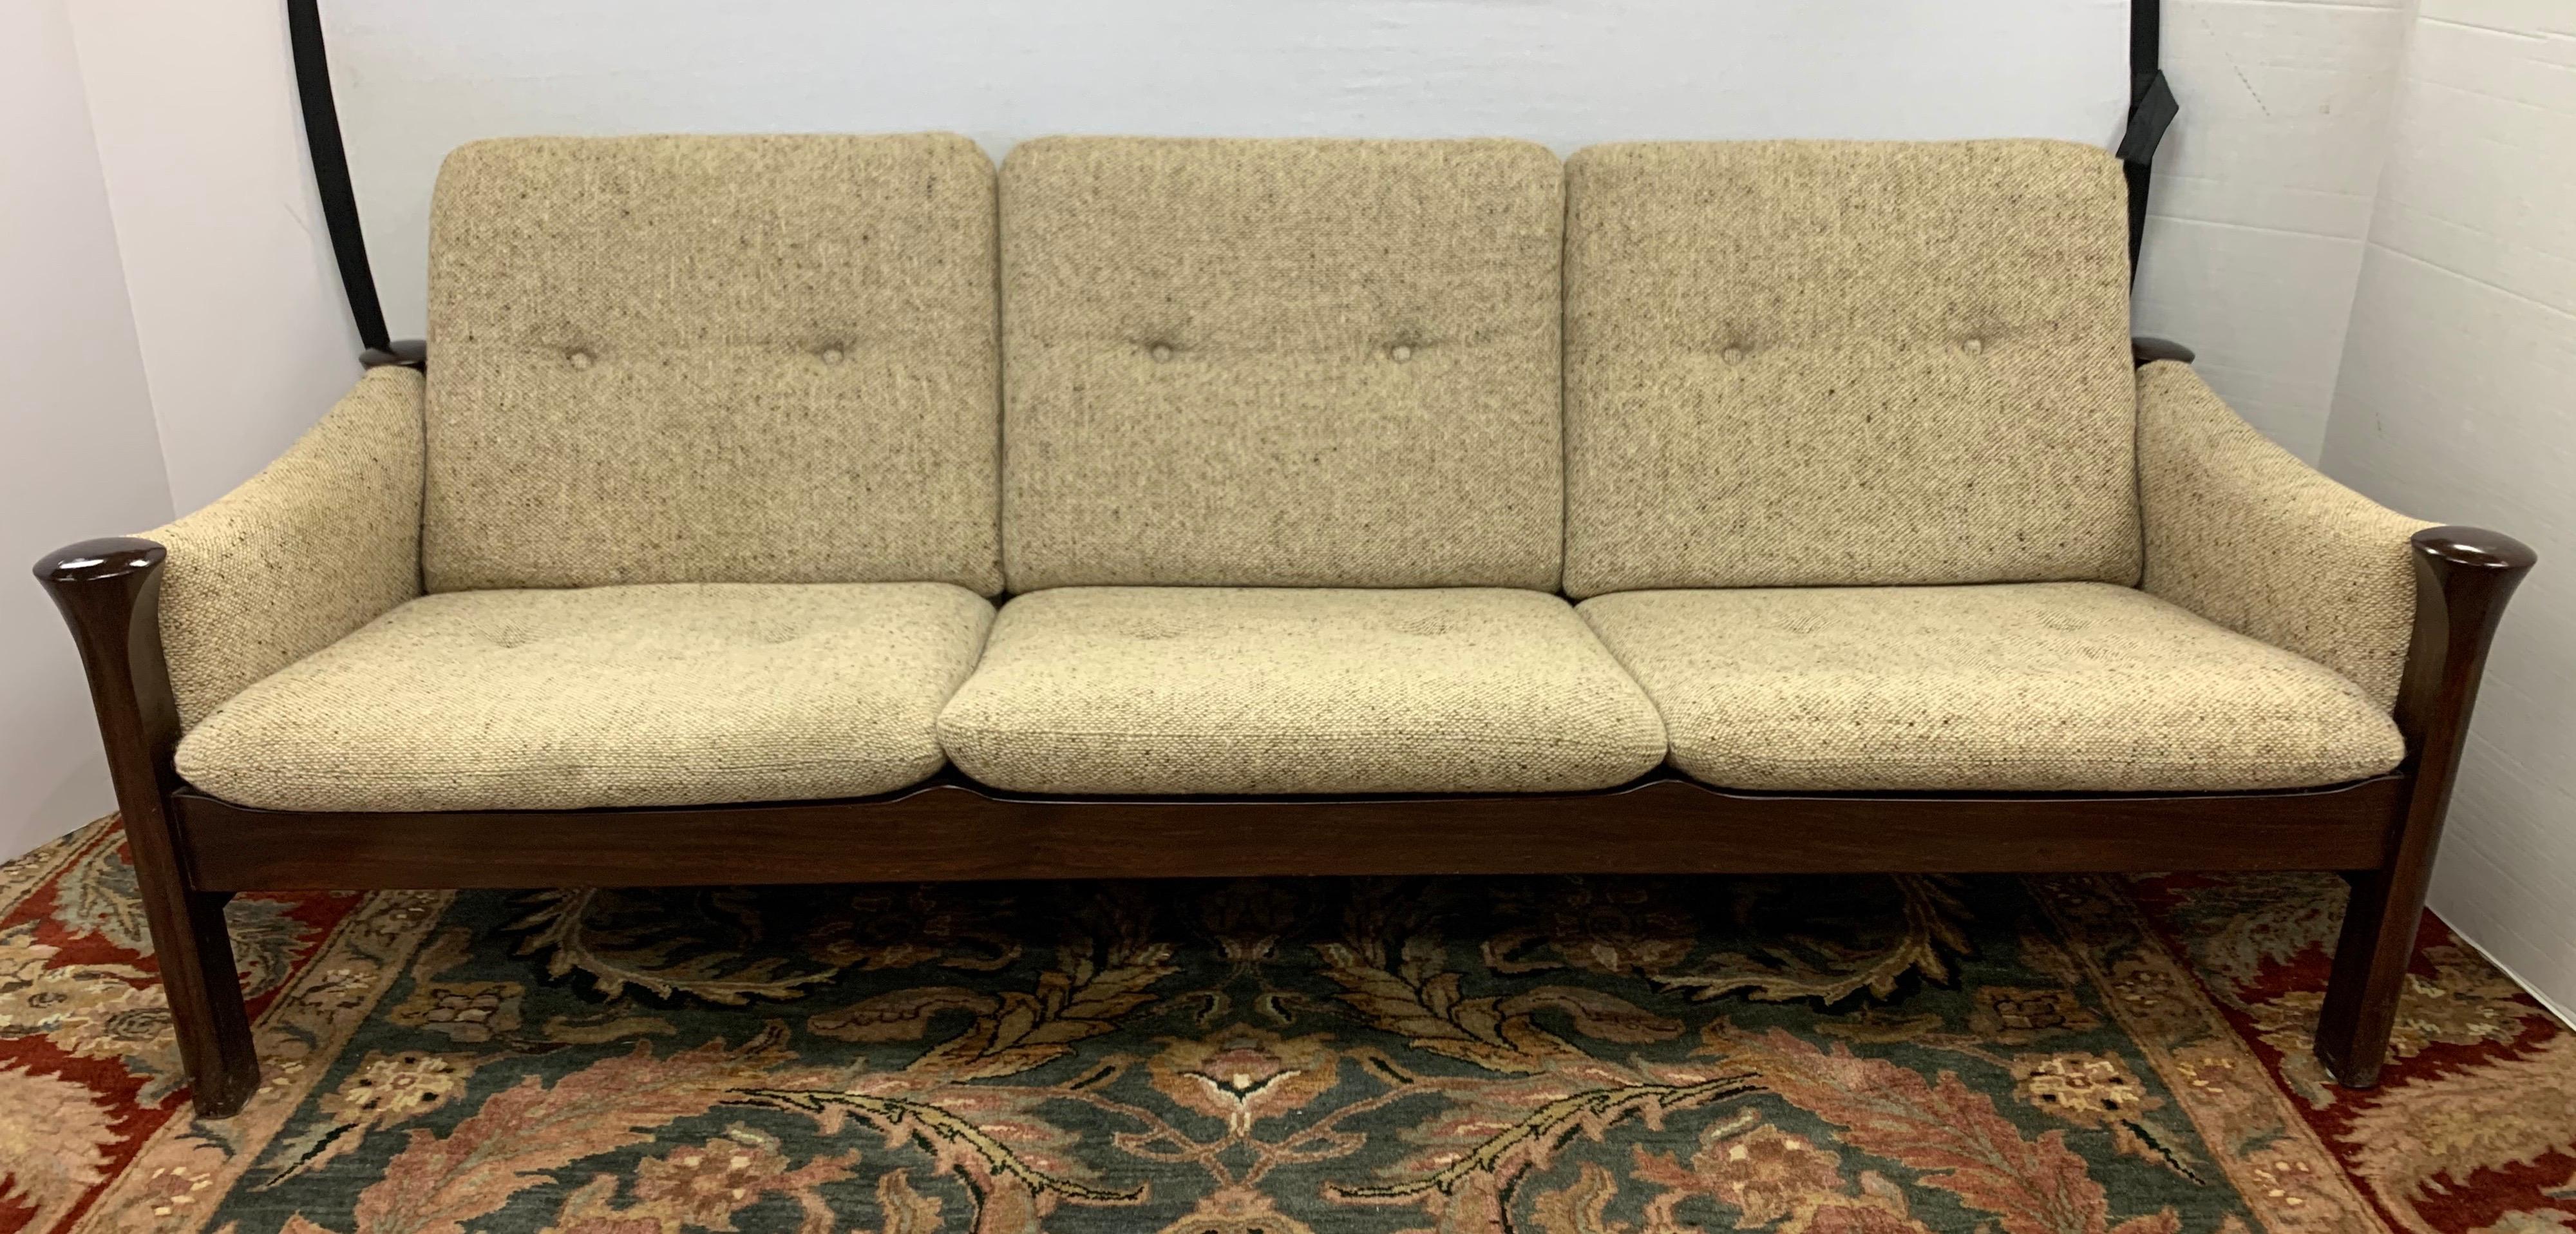 With its plinth shaped legs, bar reclining back, oatmeal tweed upholstery, and incredible lines, this signed Cado three-seat sofa by Arne Vodder is nothing short of exceptional. Made in Denmark and all original, it is still in great condition. An